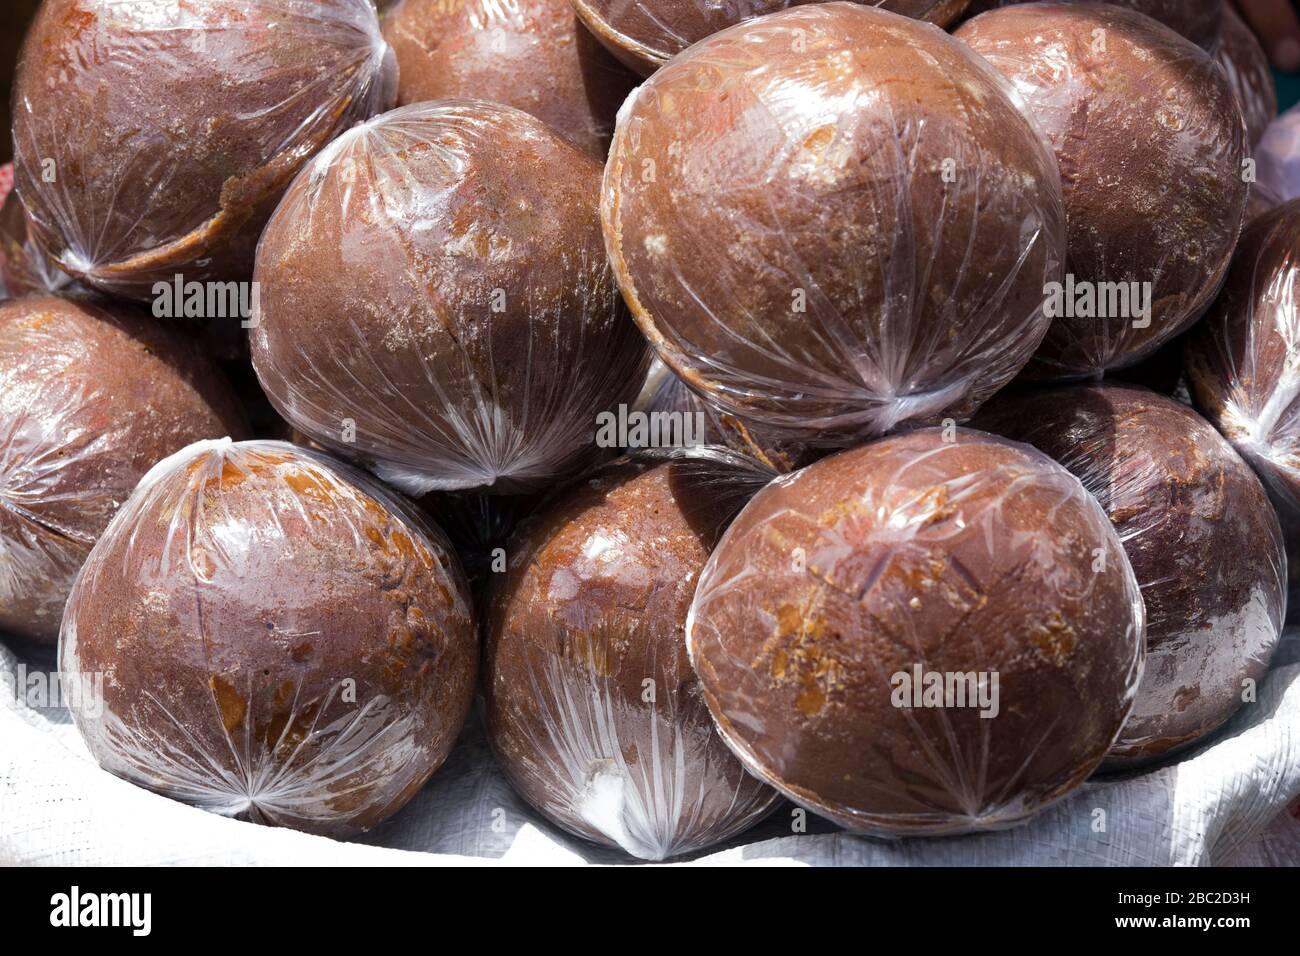 A ball of palm sugar in Indonesia market Stock Photo